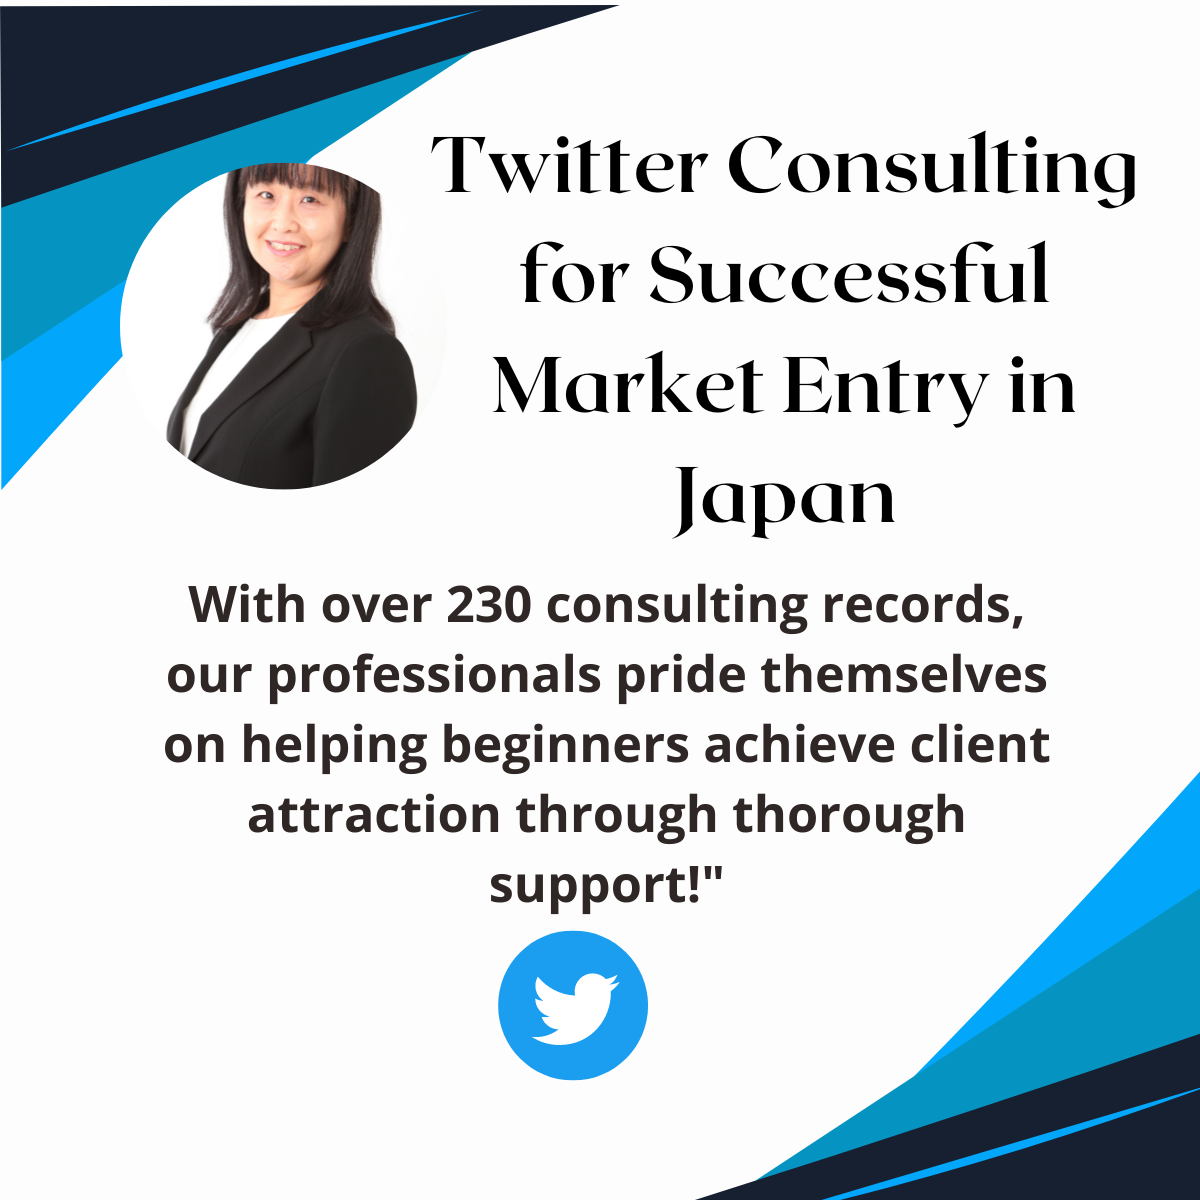 Success in expanding into Japan! Twitter consulting